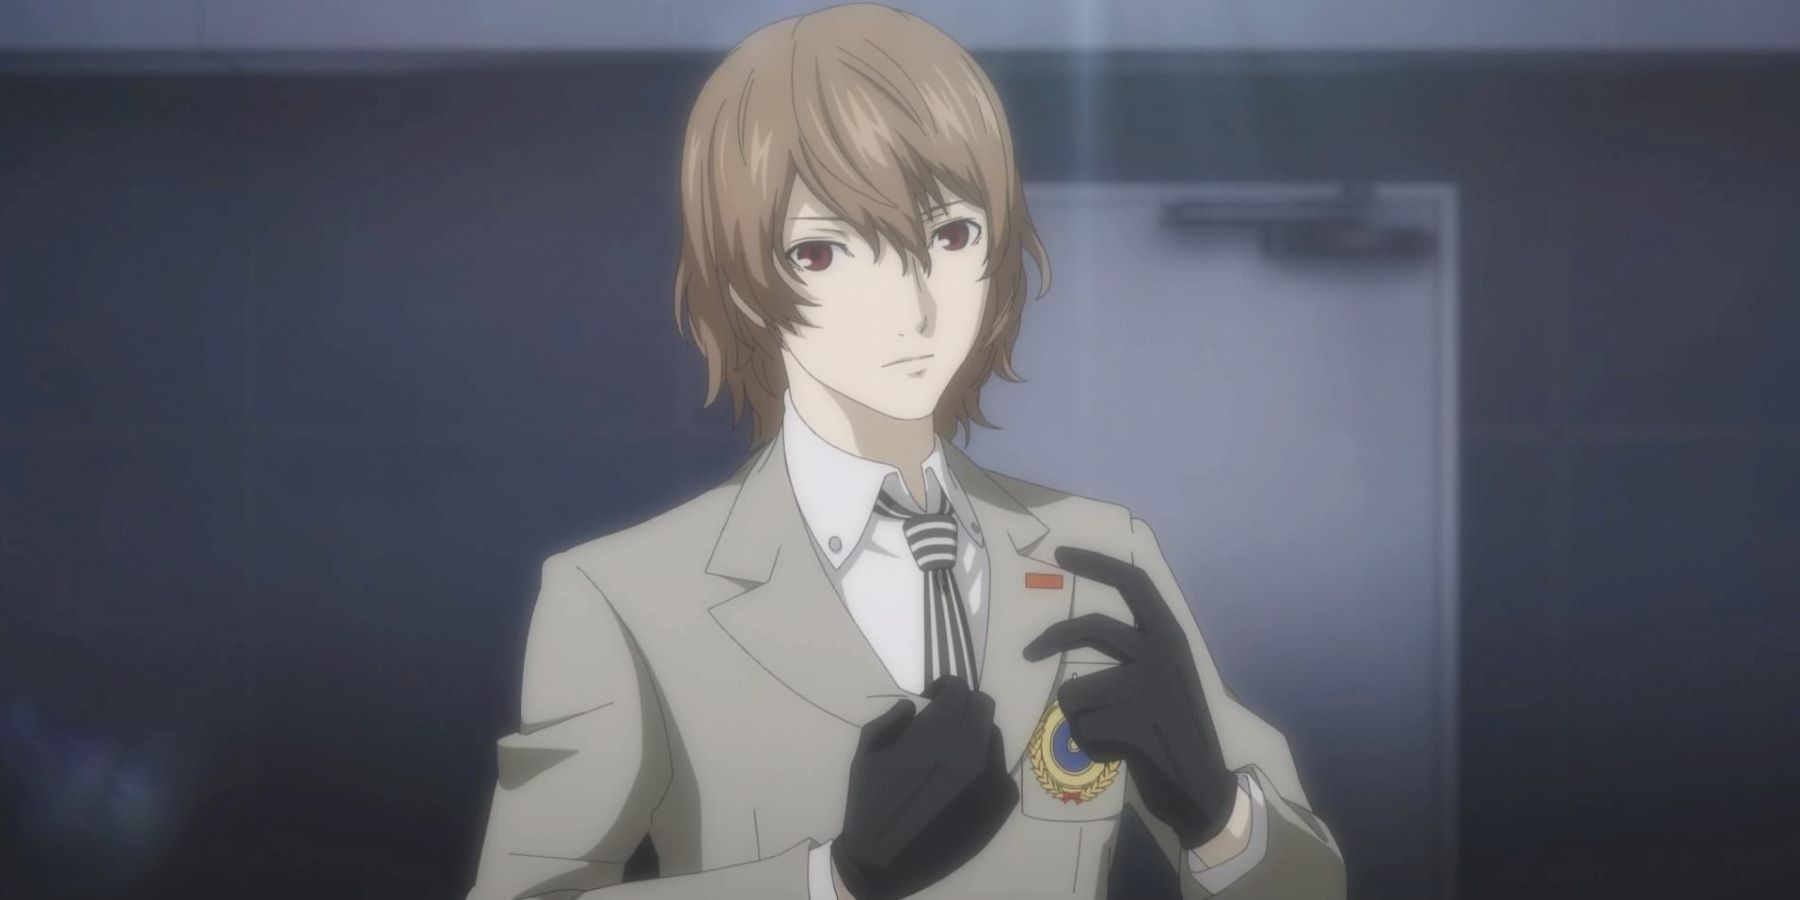 Goro Akechi reaching into his coat in the Persona 5 anime adaptation